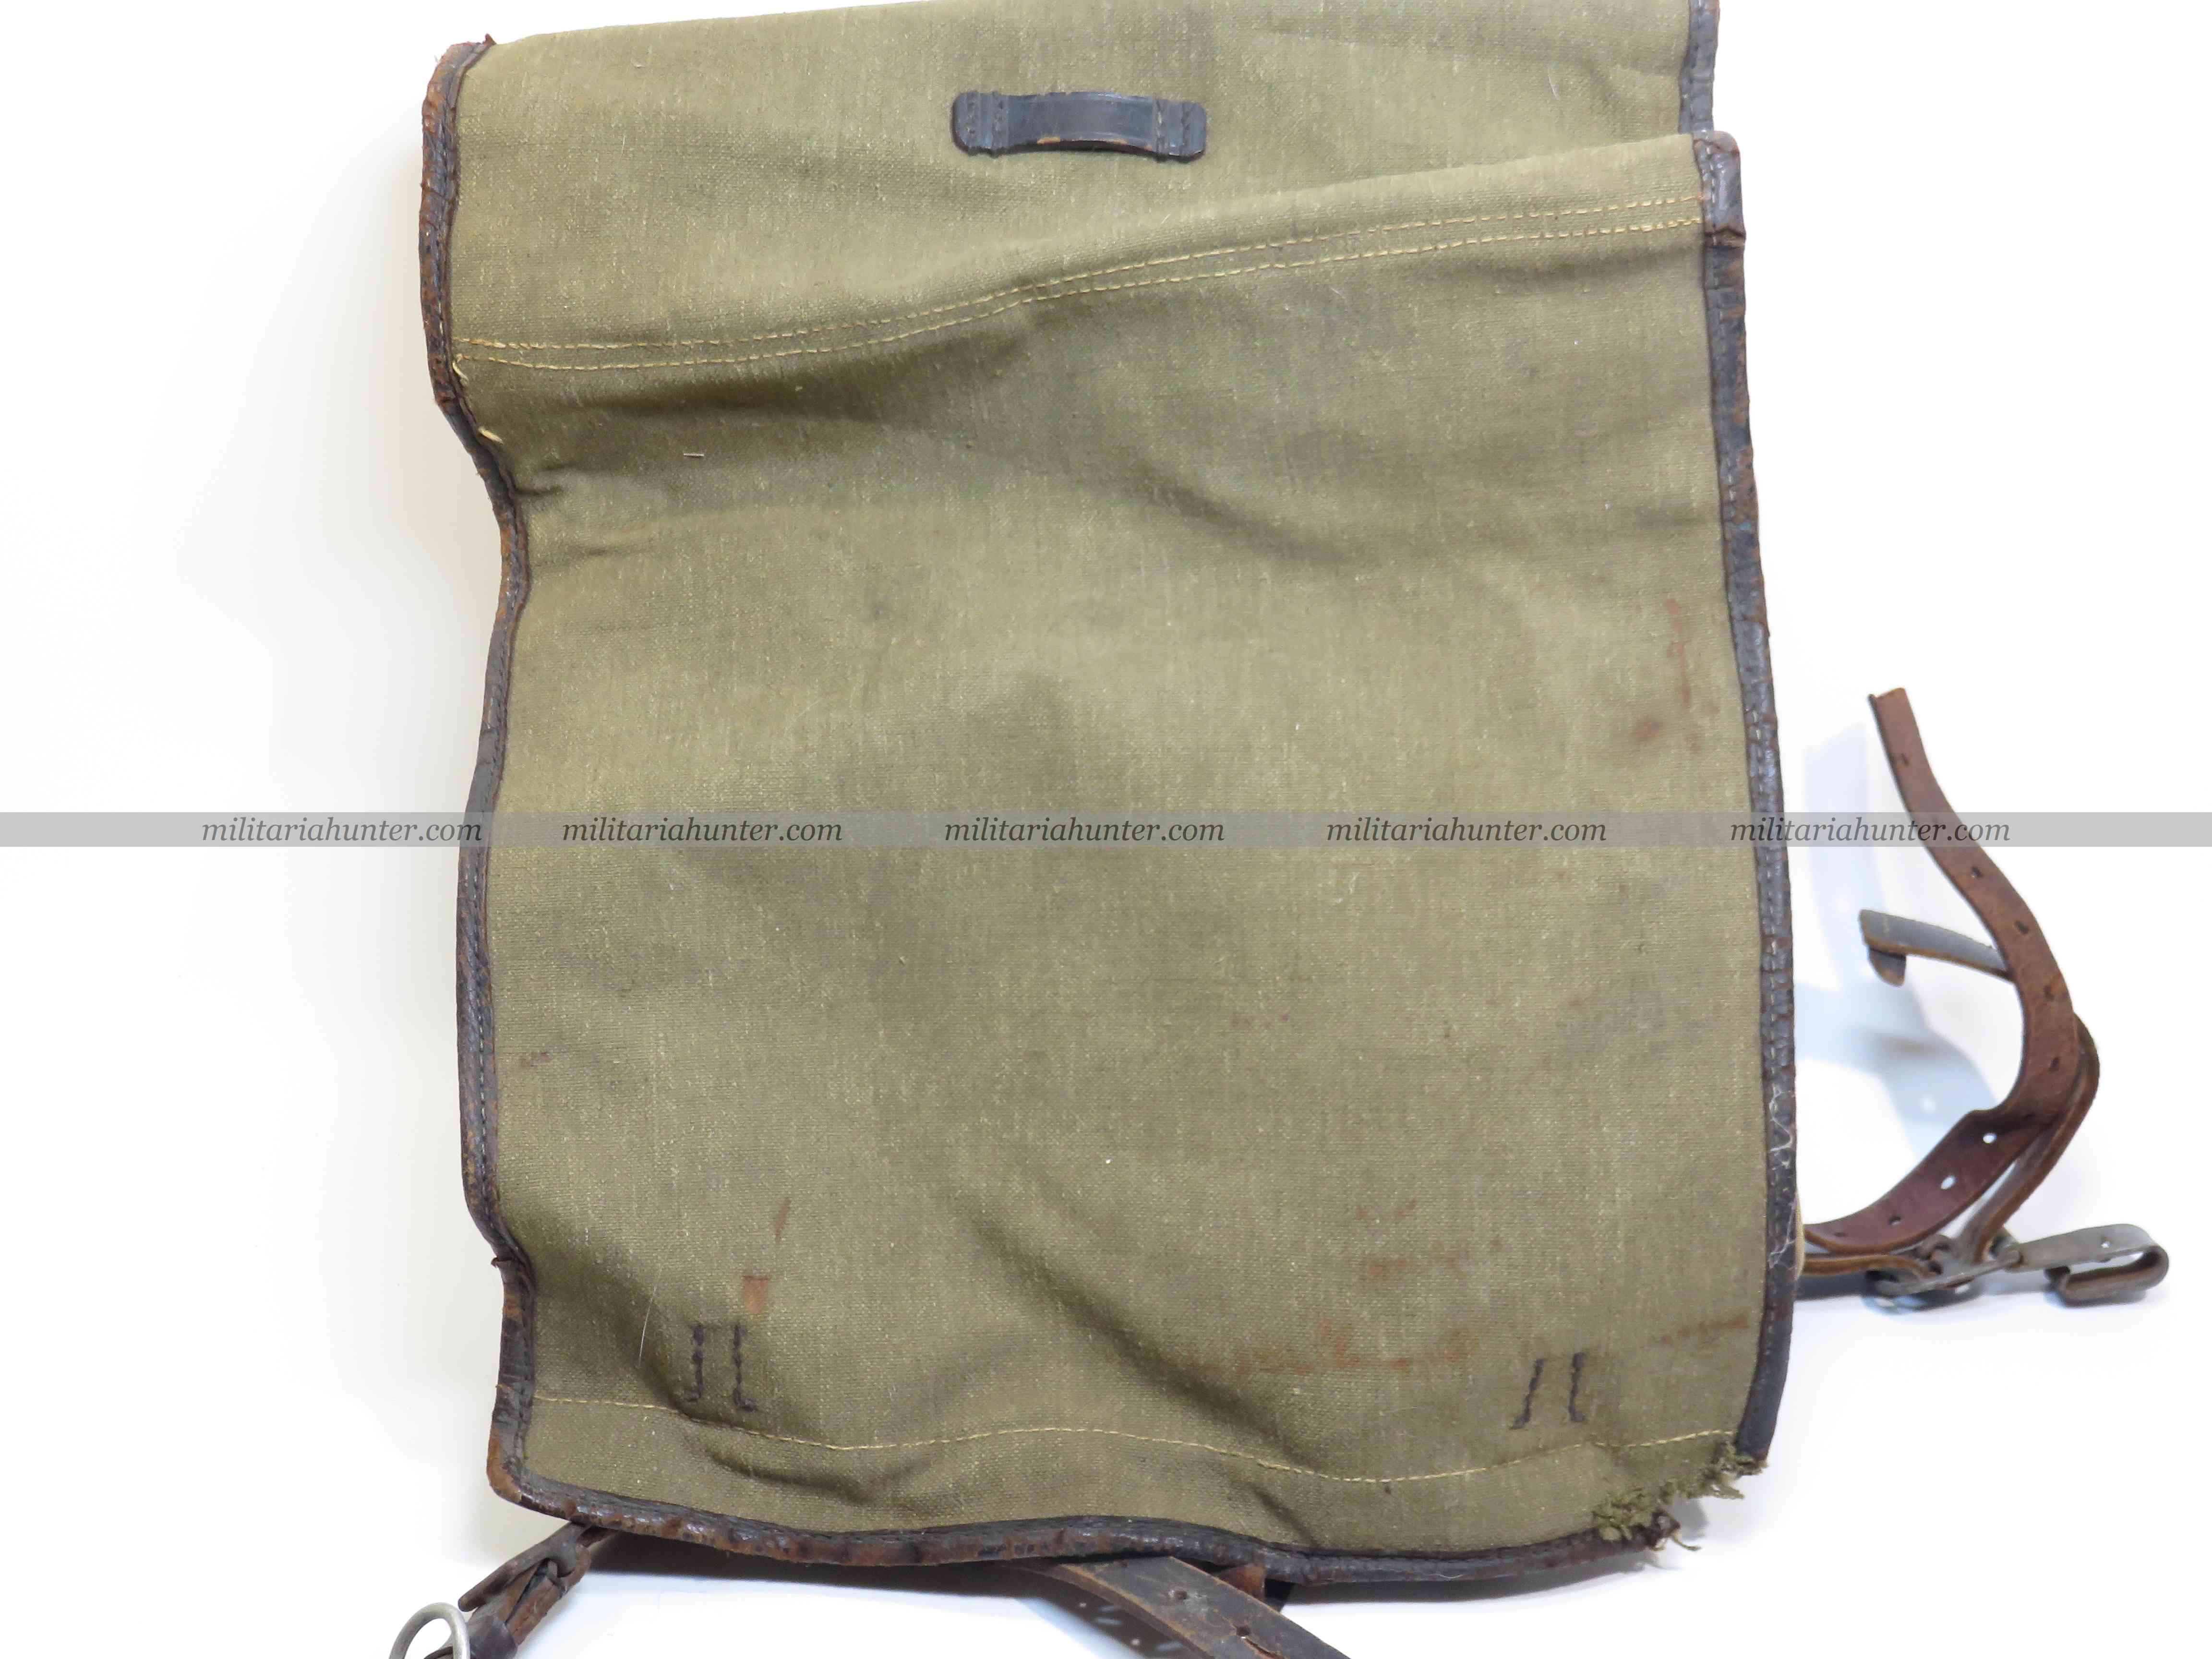 militaria : ww2 german backpack - Tornister allemand